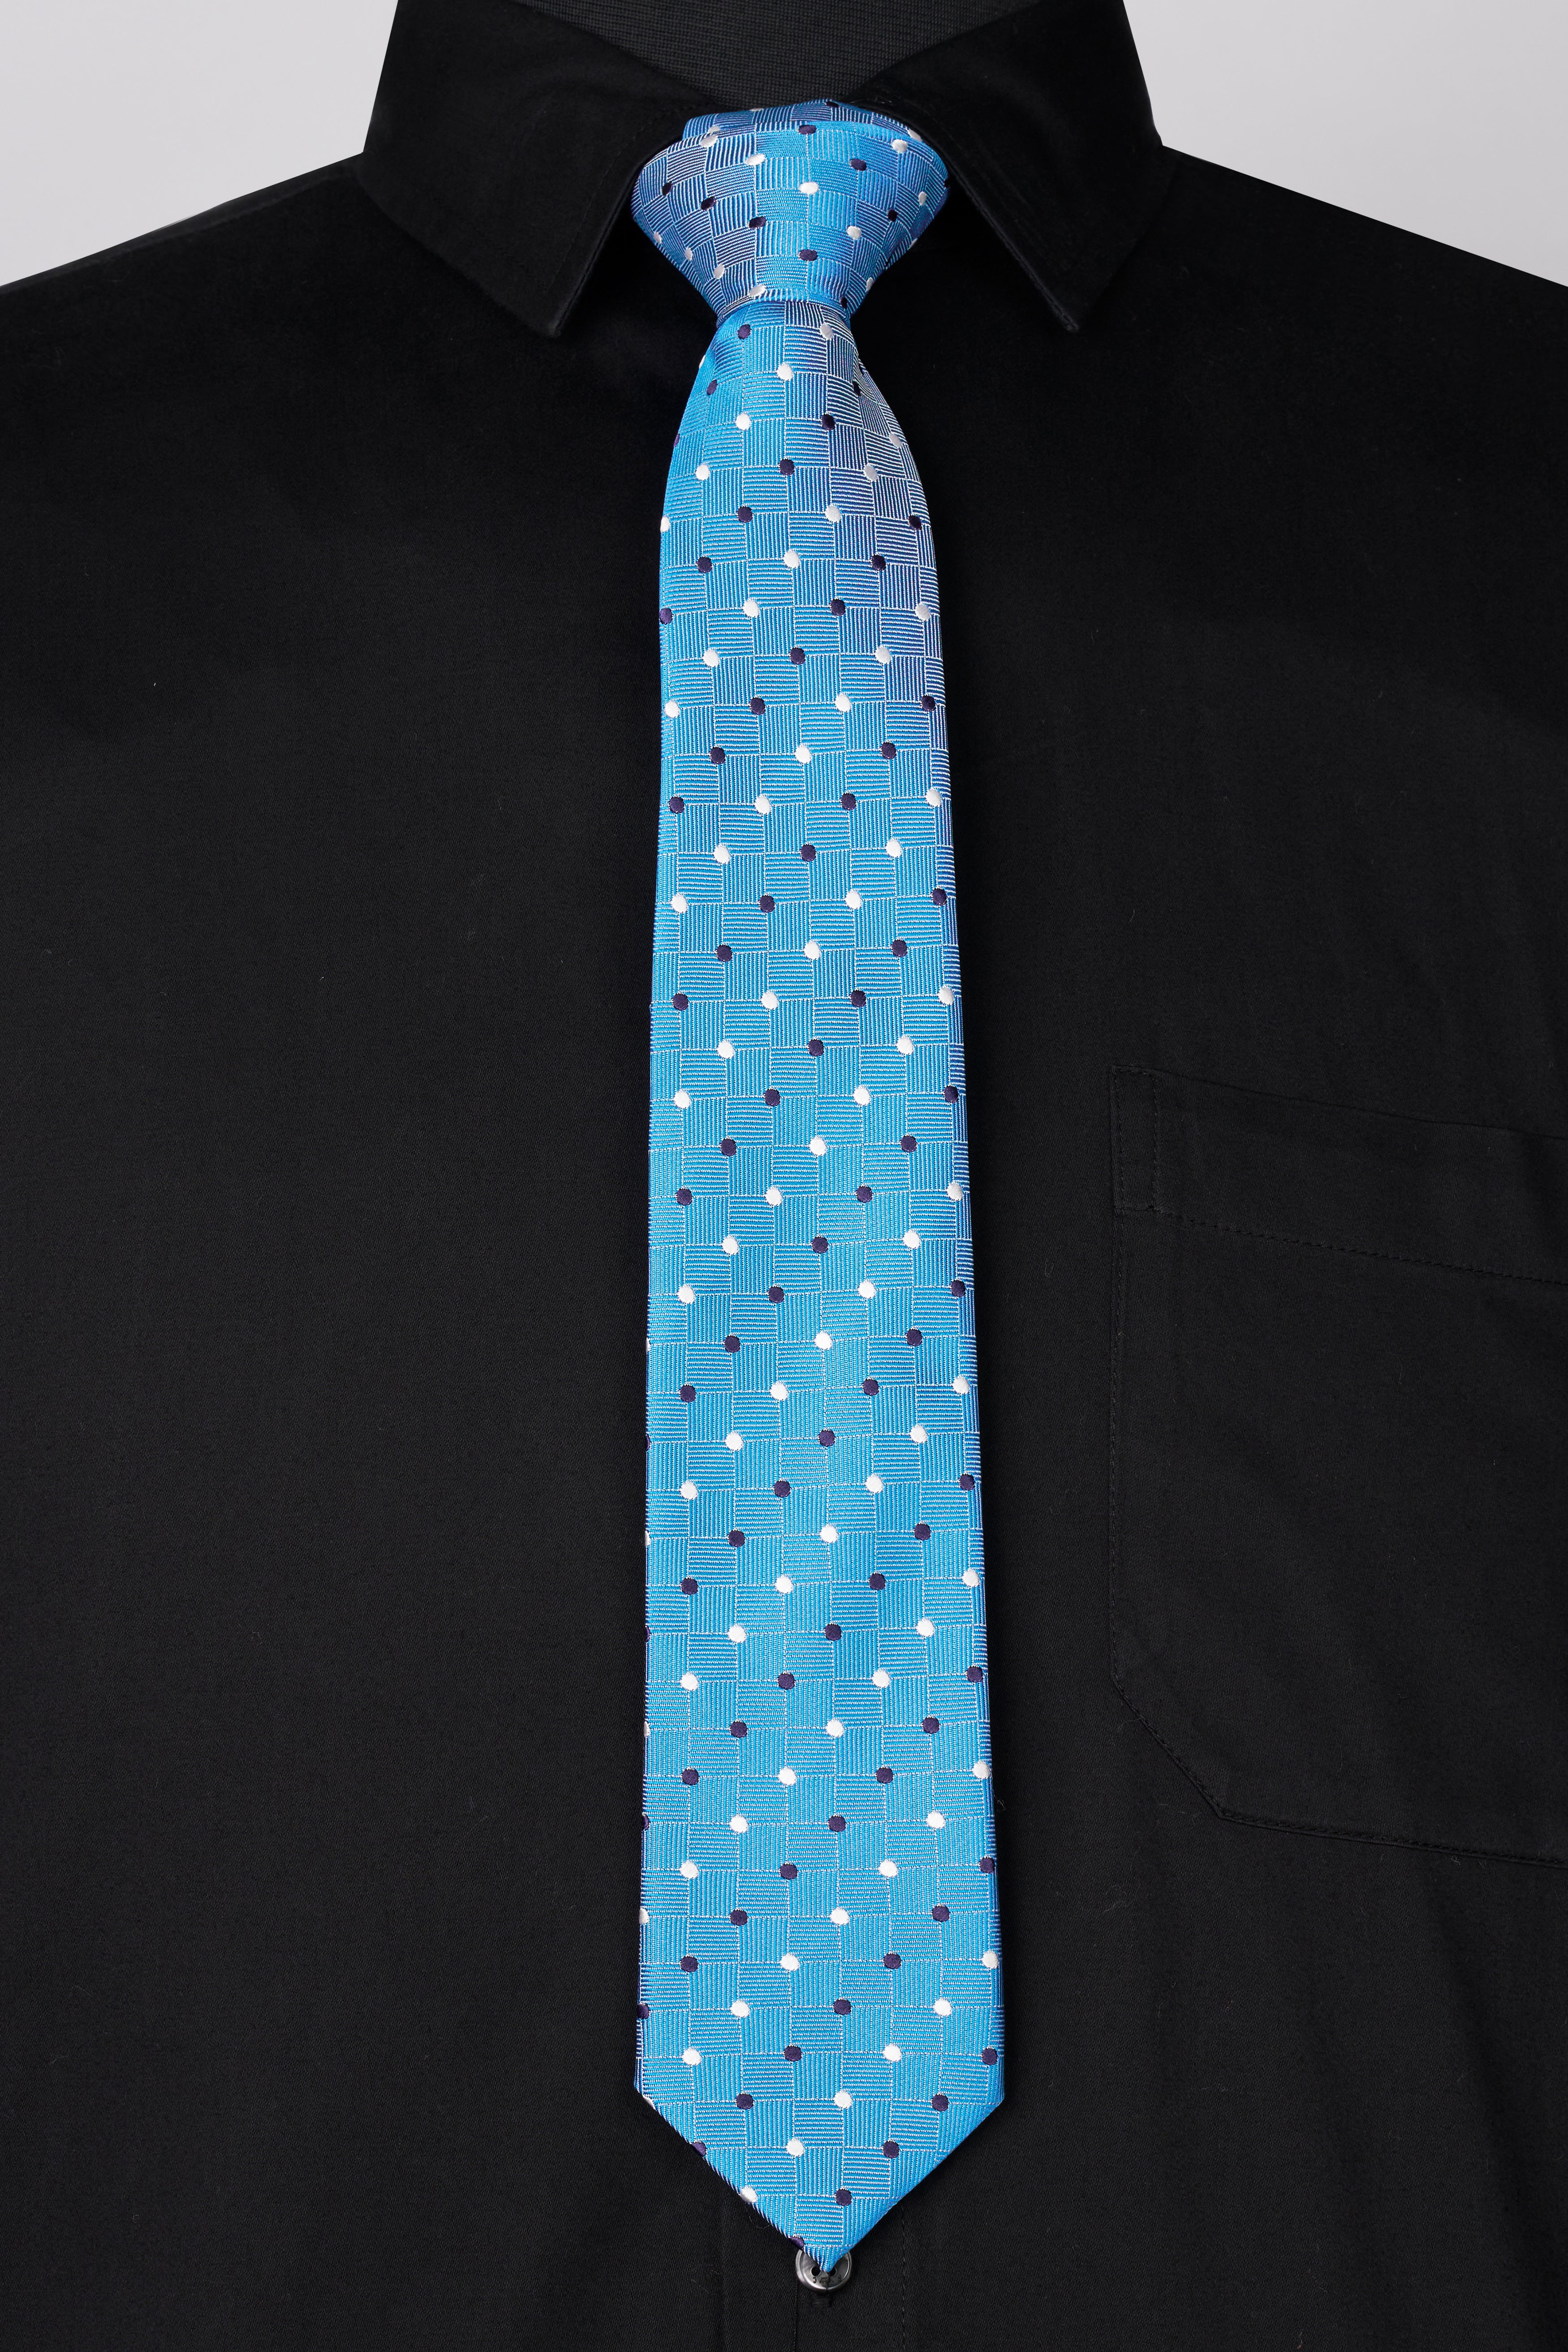 Shakespeare Light Blue Textutred Jacquard Tie with Pocket Square TP064